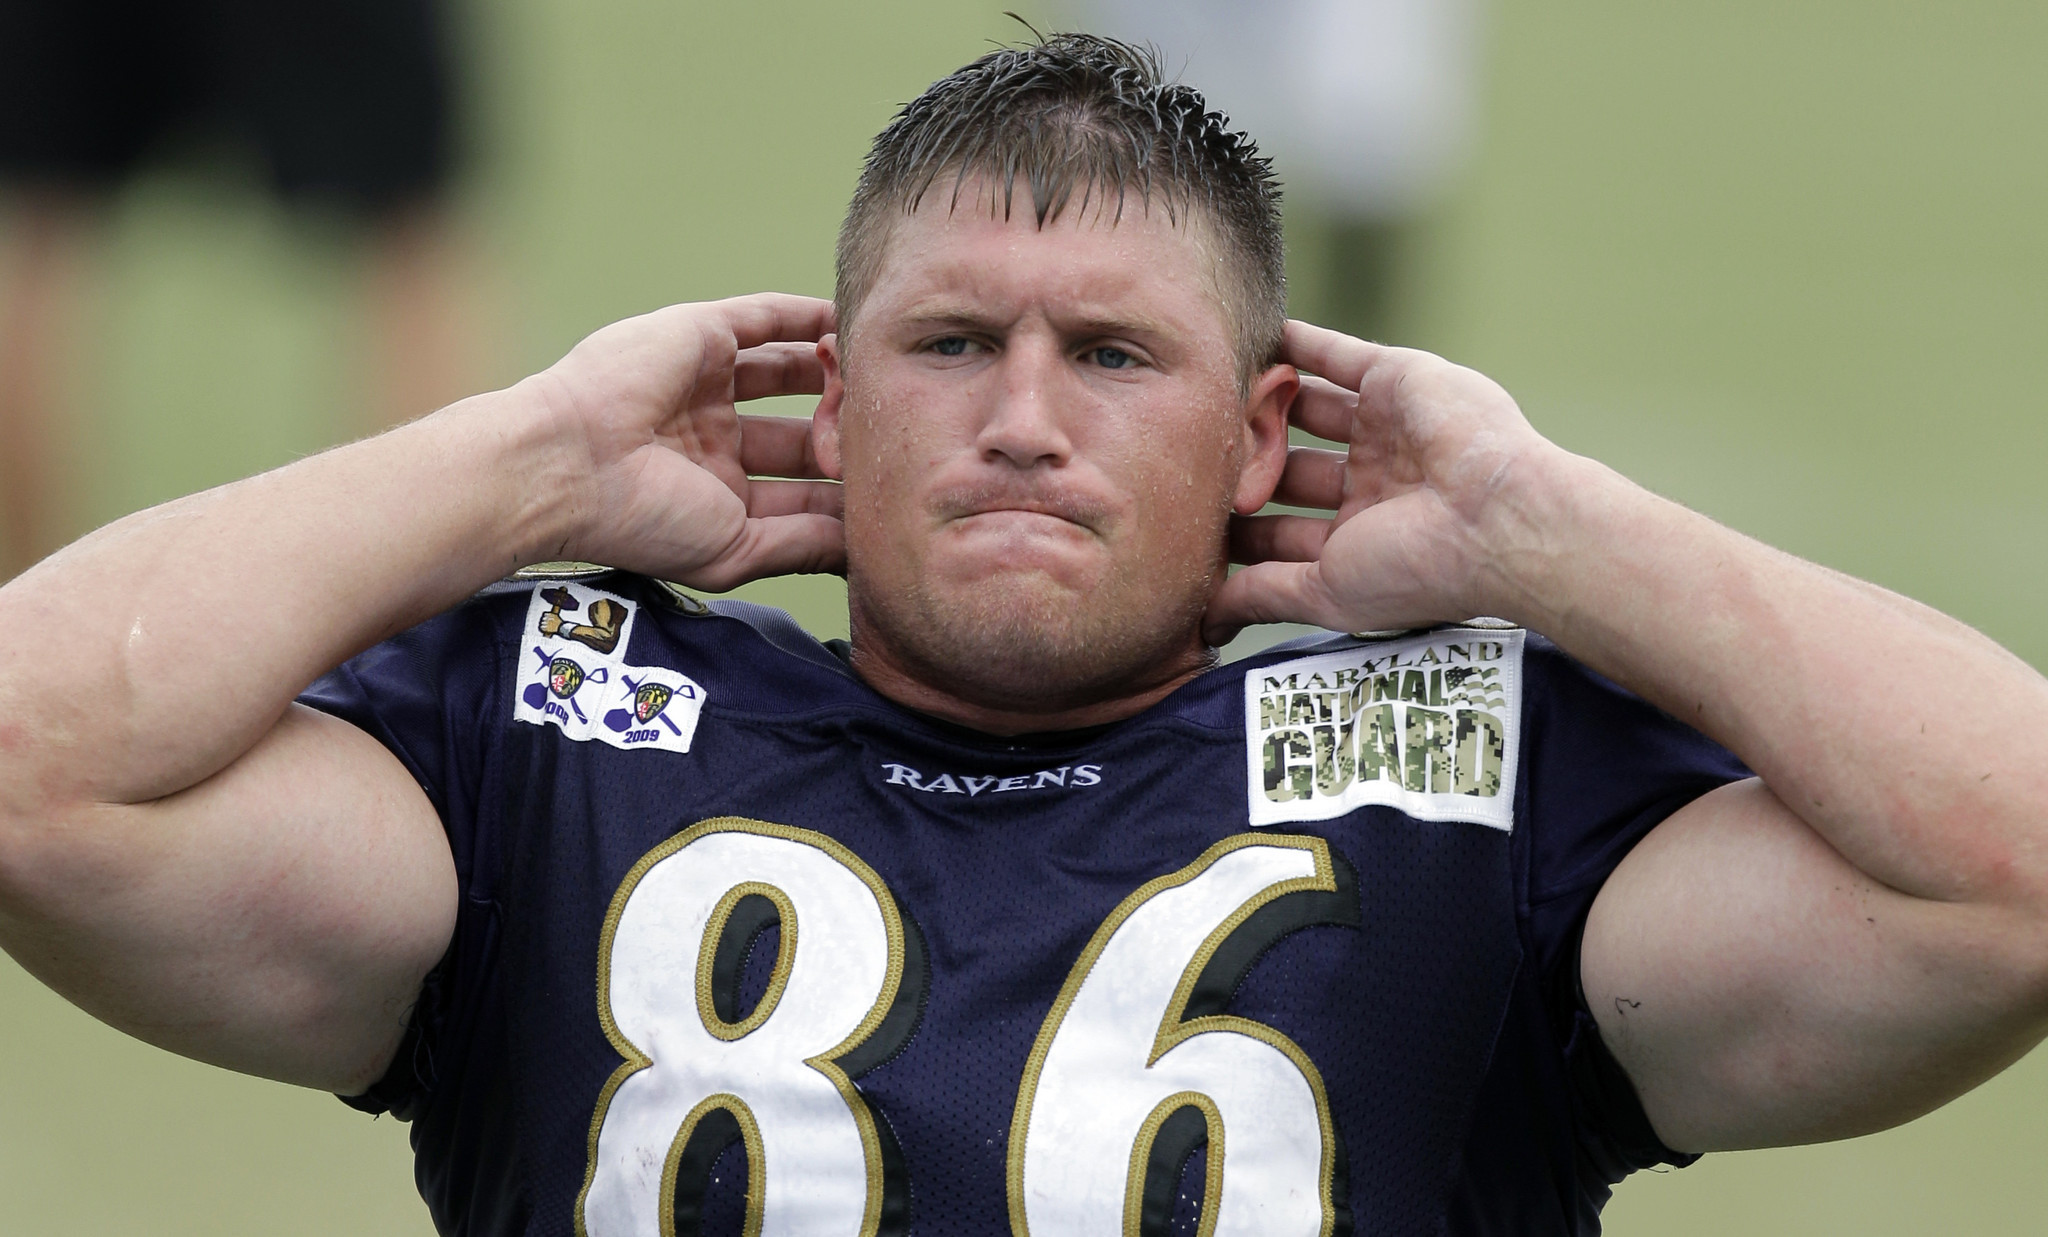 Anguish, sympathy for Todd Heap after ex-NFL player's kid killed - Baltimore Sun